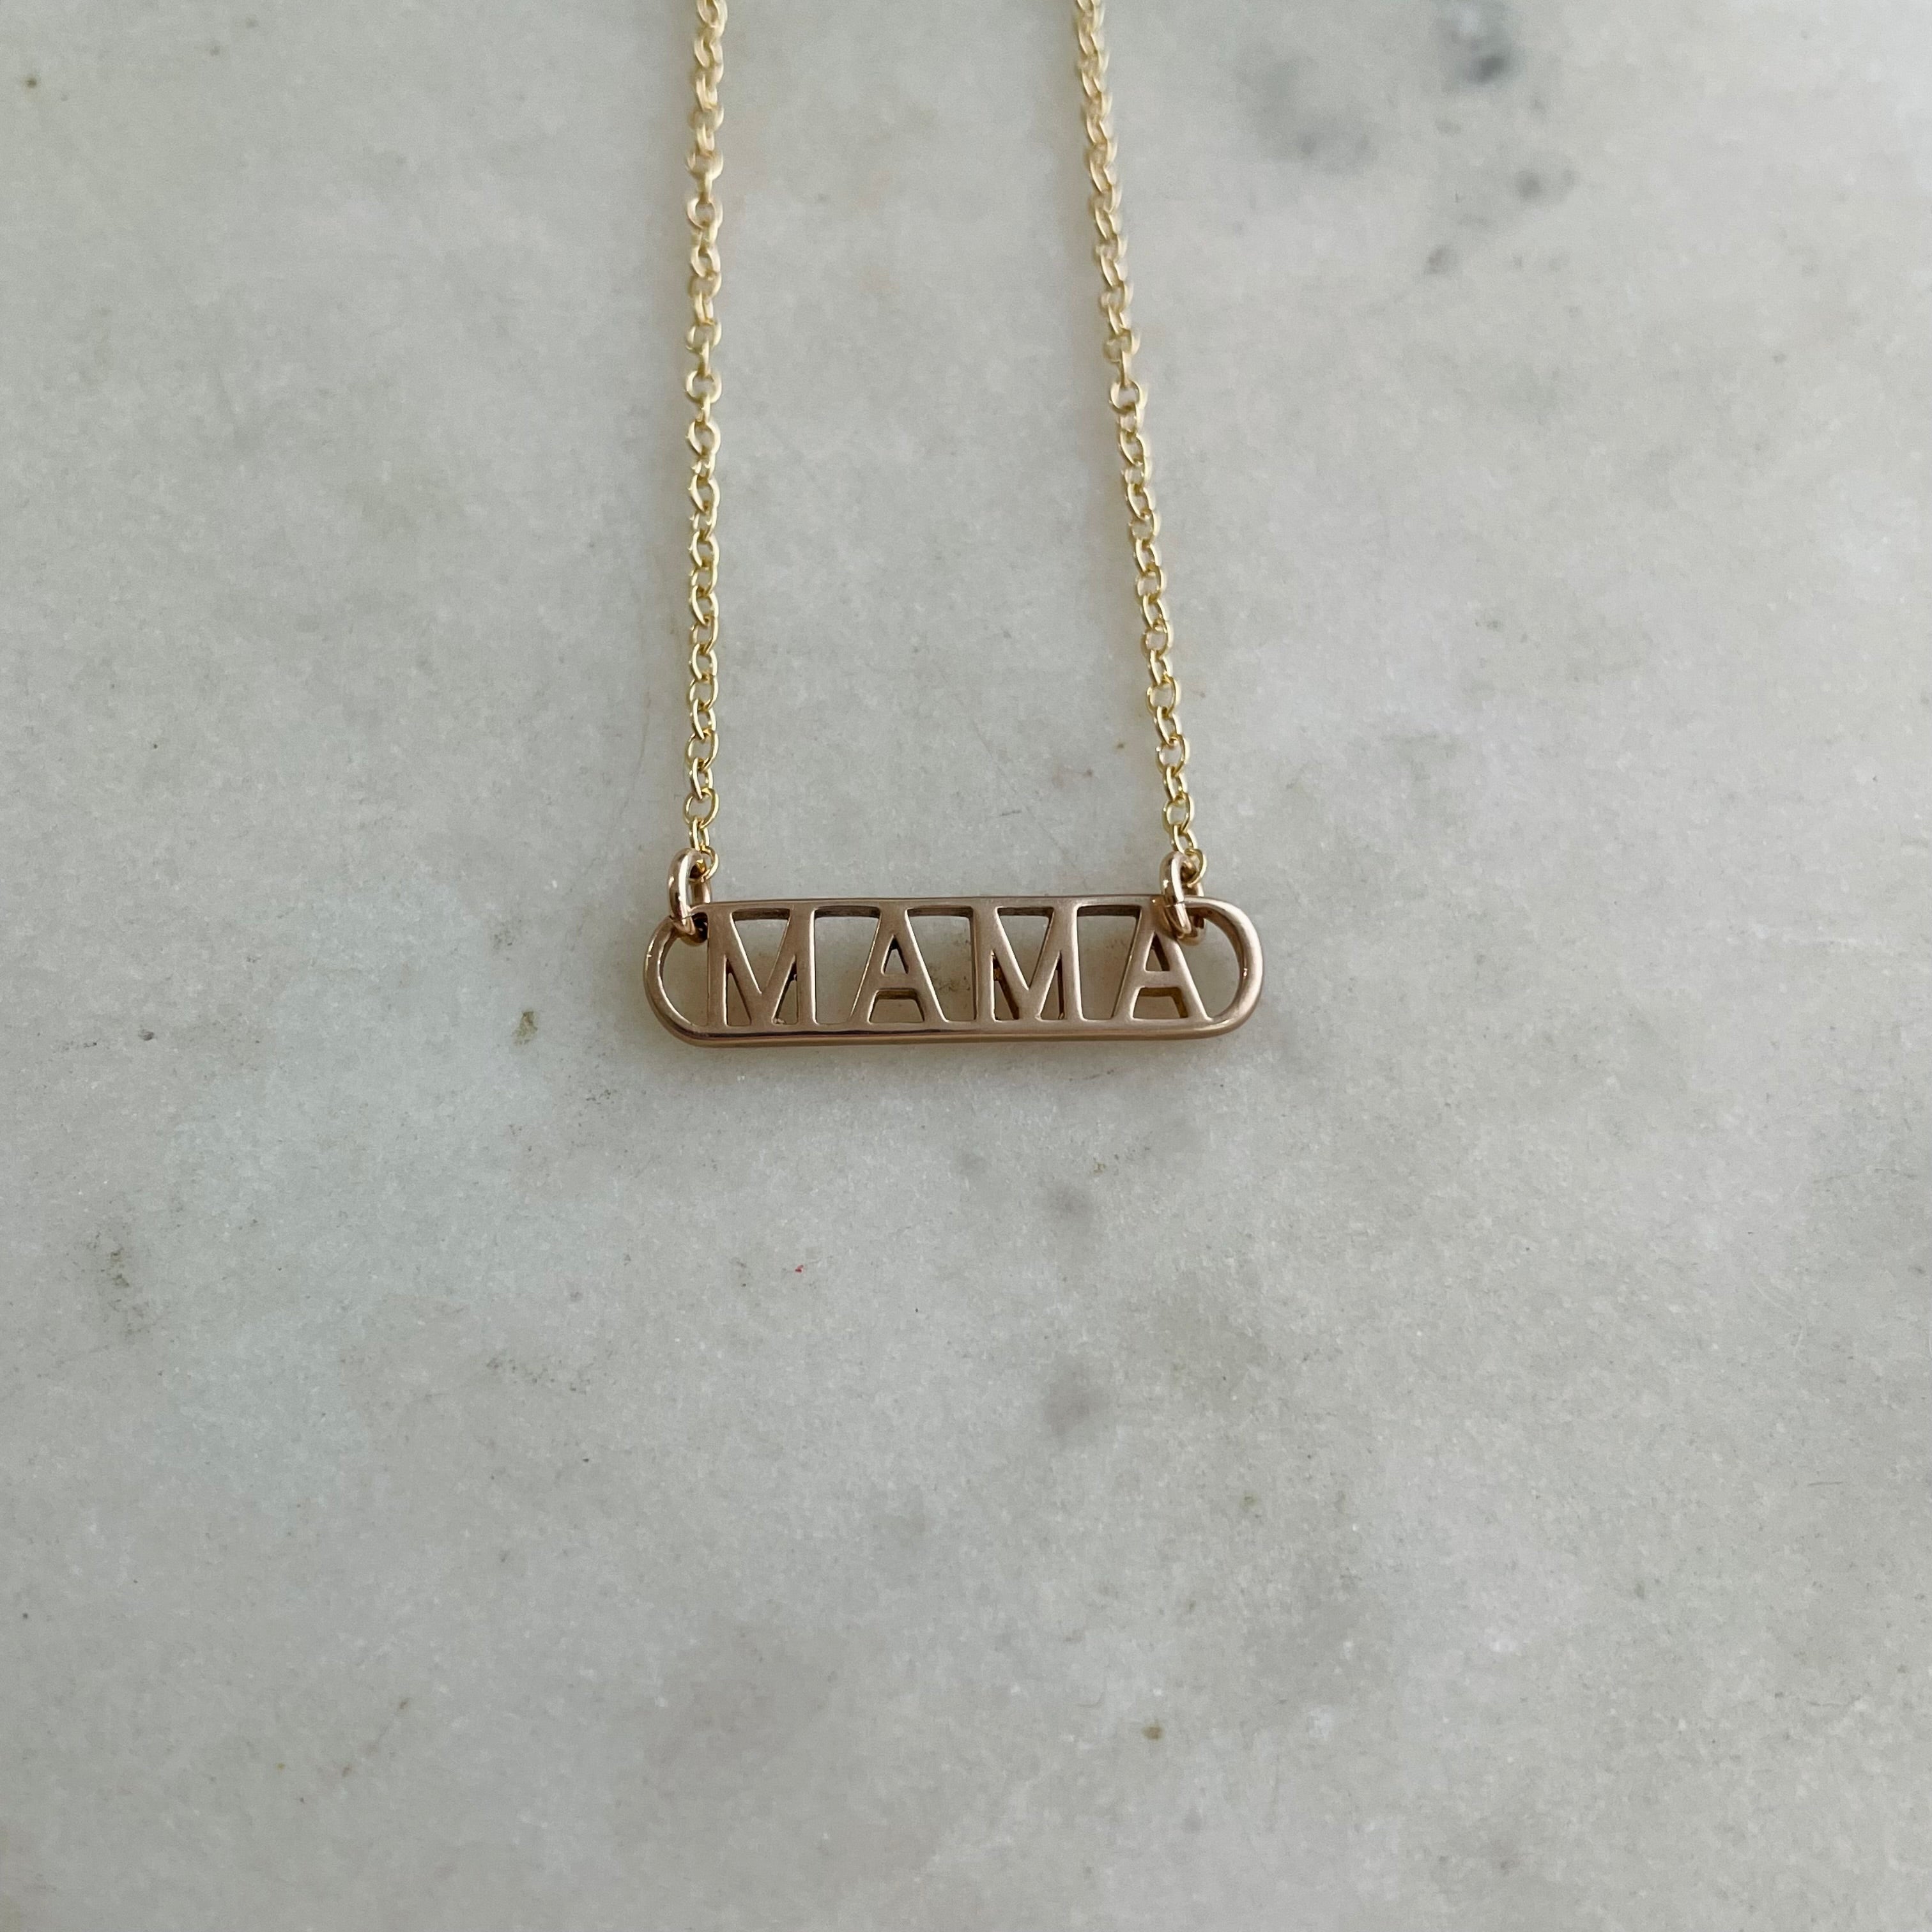 Buy 14kt Gold MAMA Letter Necklace Online in India | Zariin